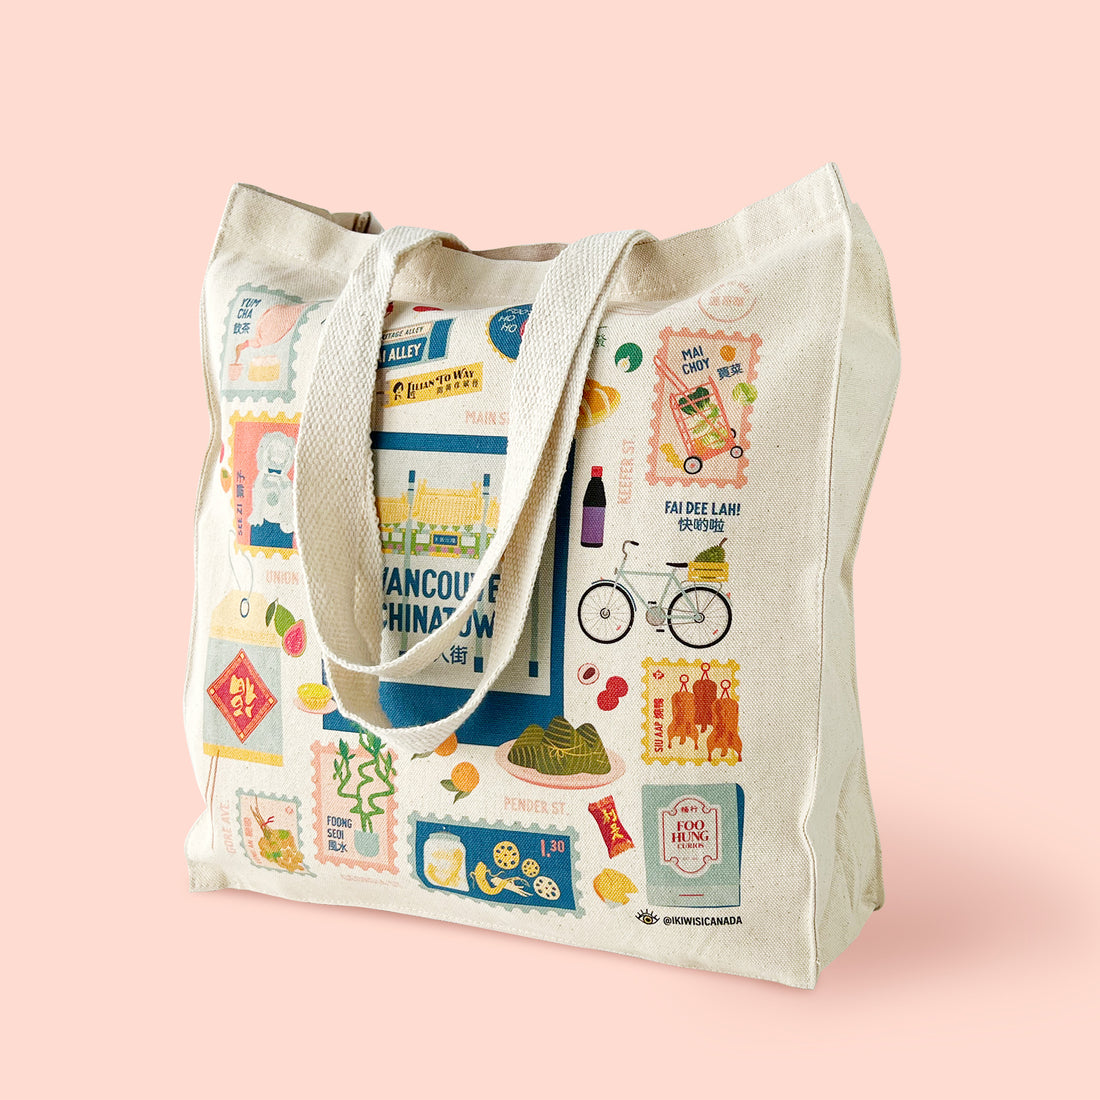 Vancouver Chinatown tote bag by I&